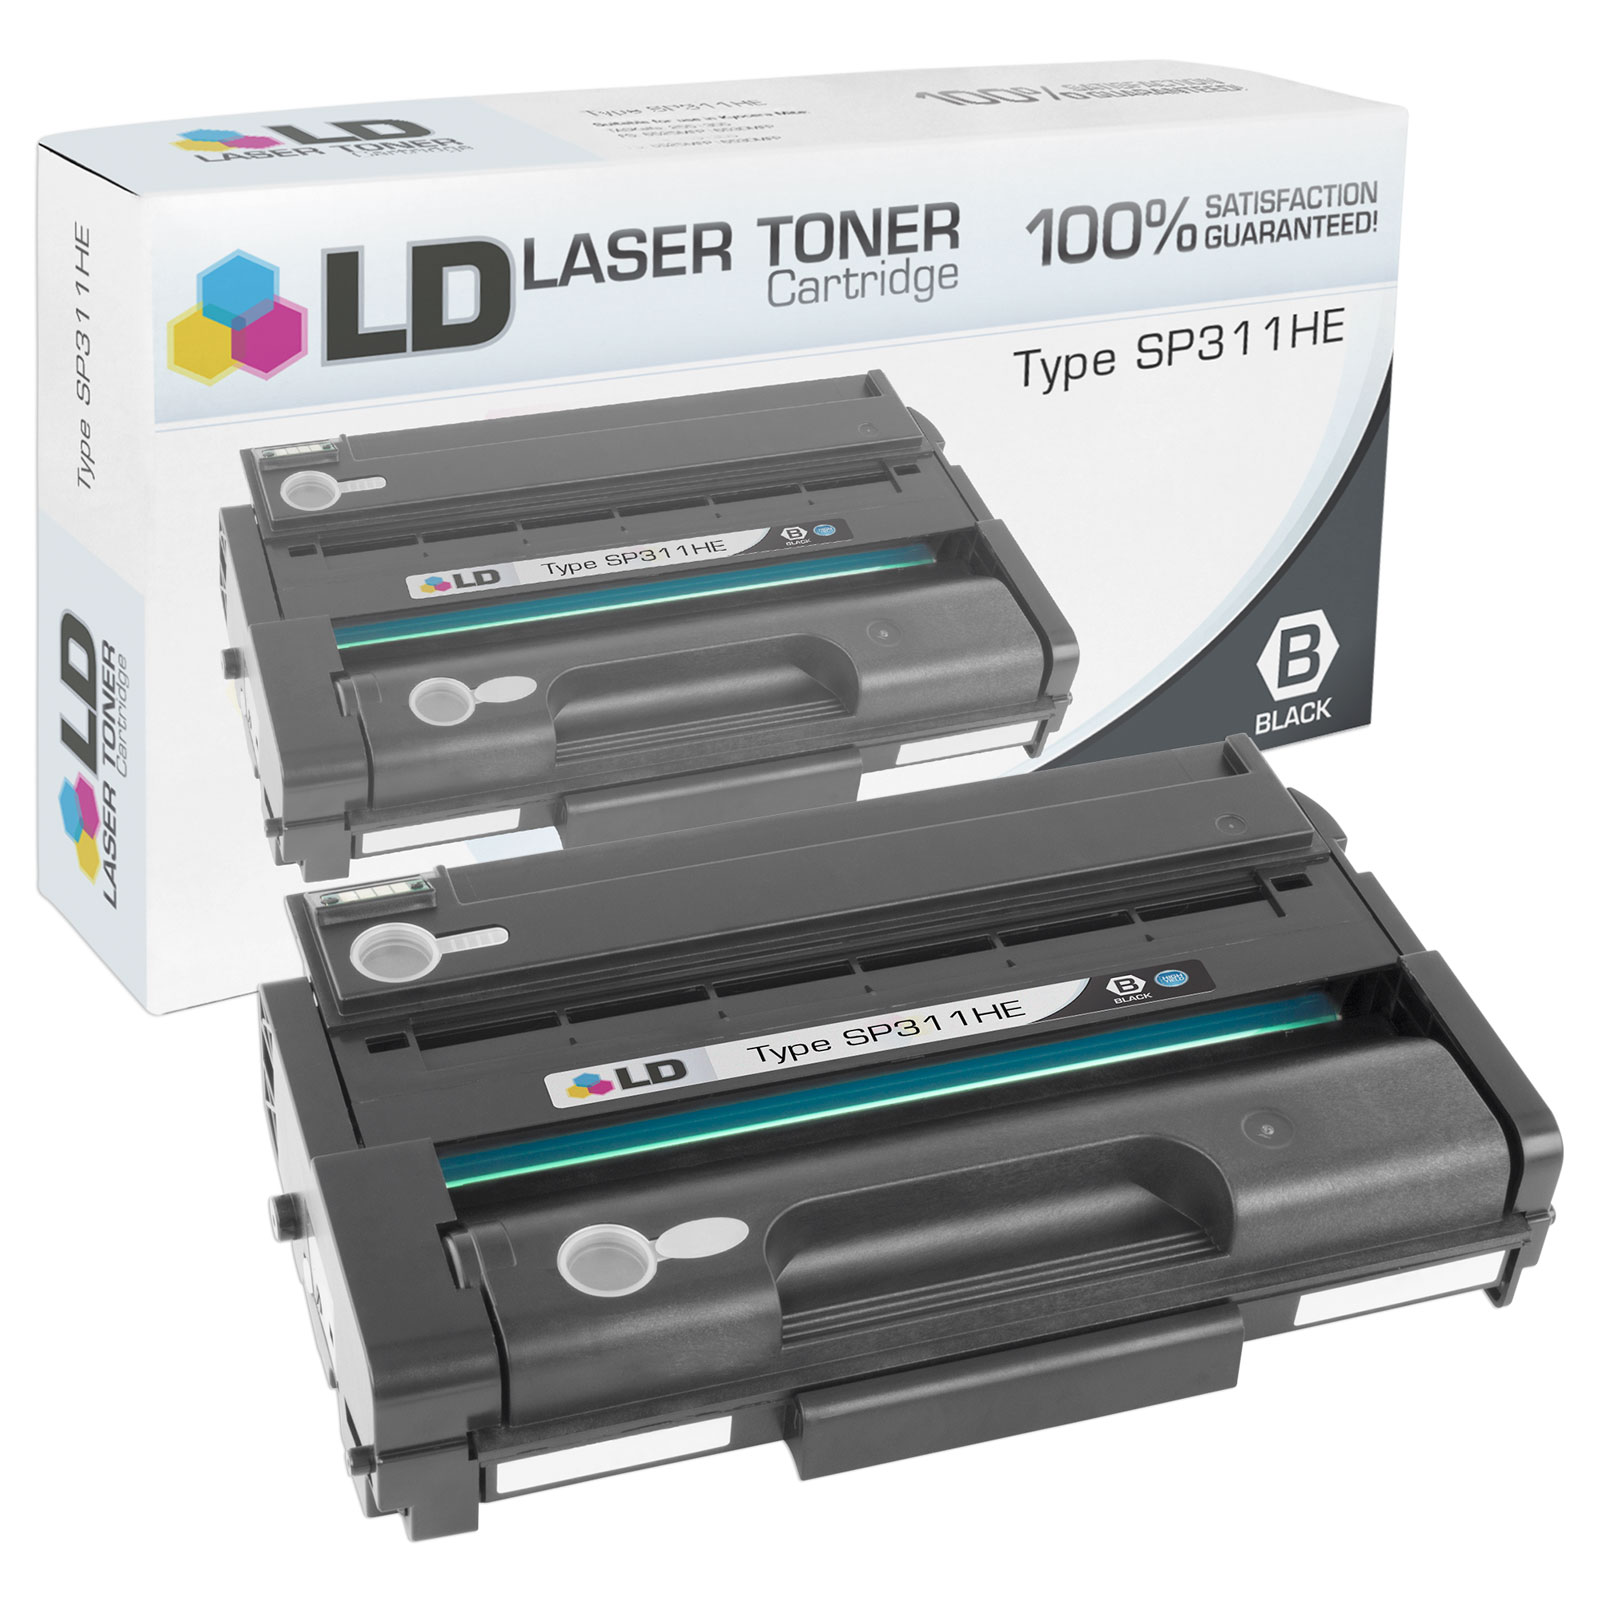 Compatible Ricoh 407245 High Yield Black Toner Cartridge (3,500 Page Yield) - image 1 of 2